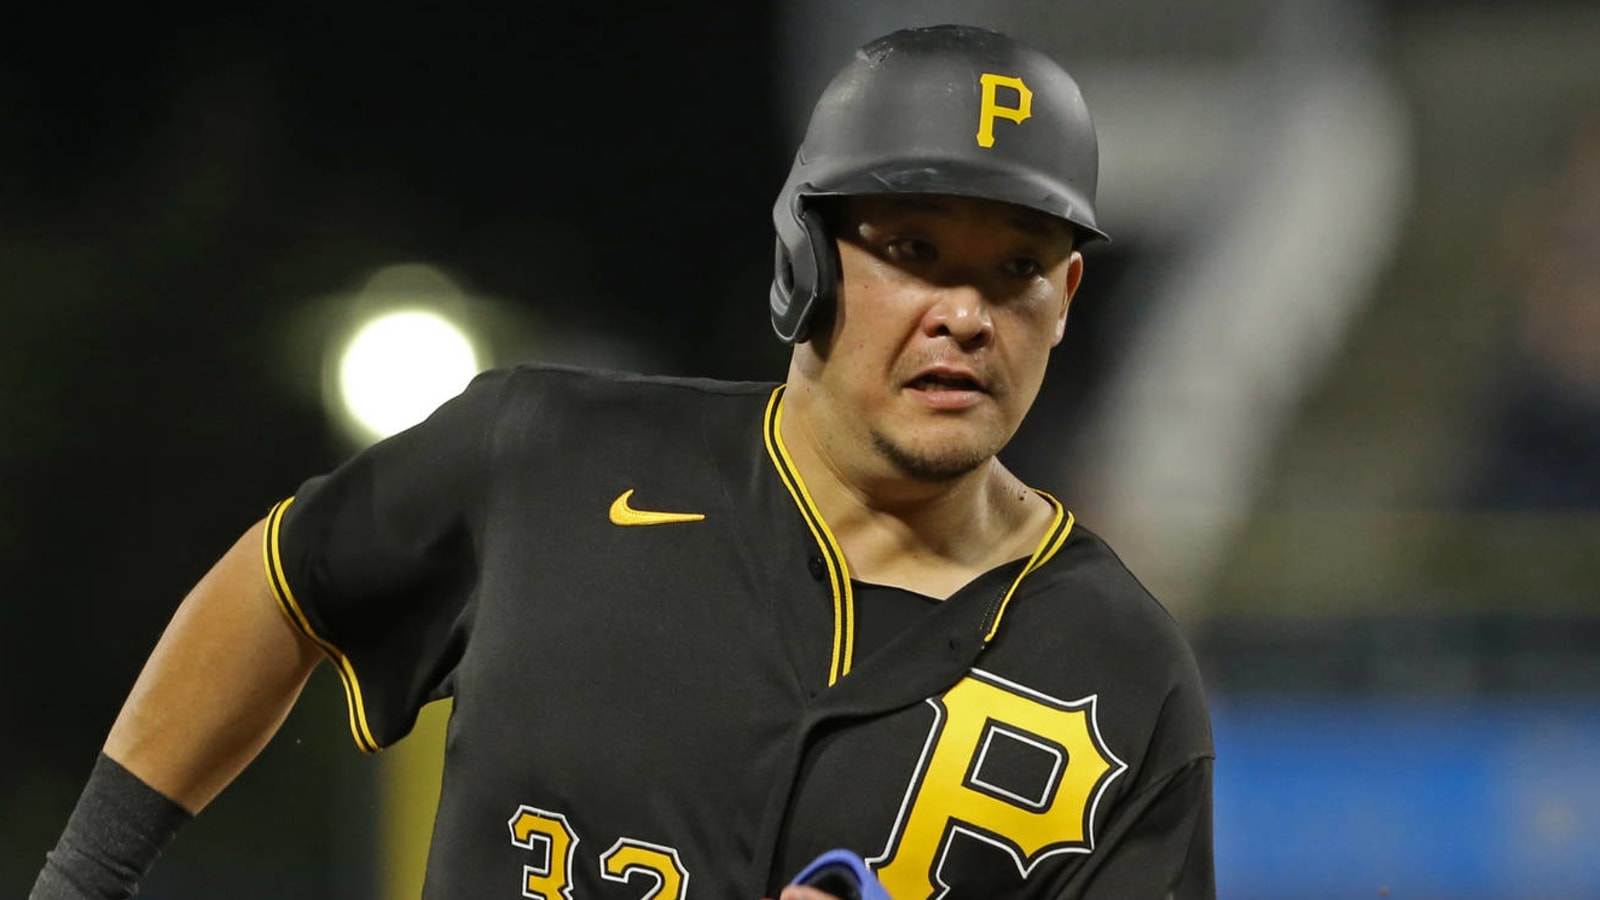 Yoshi Tsutsugo is finding his stride in Pittsburgh